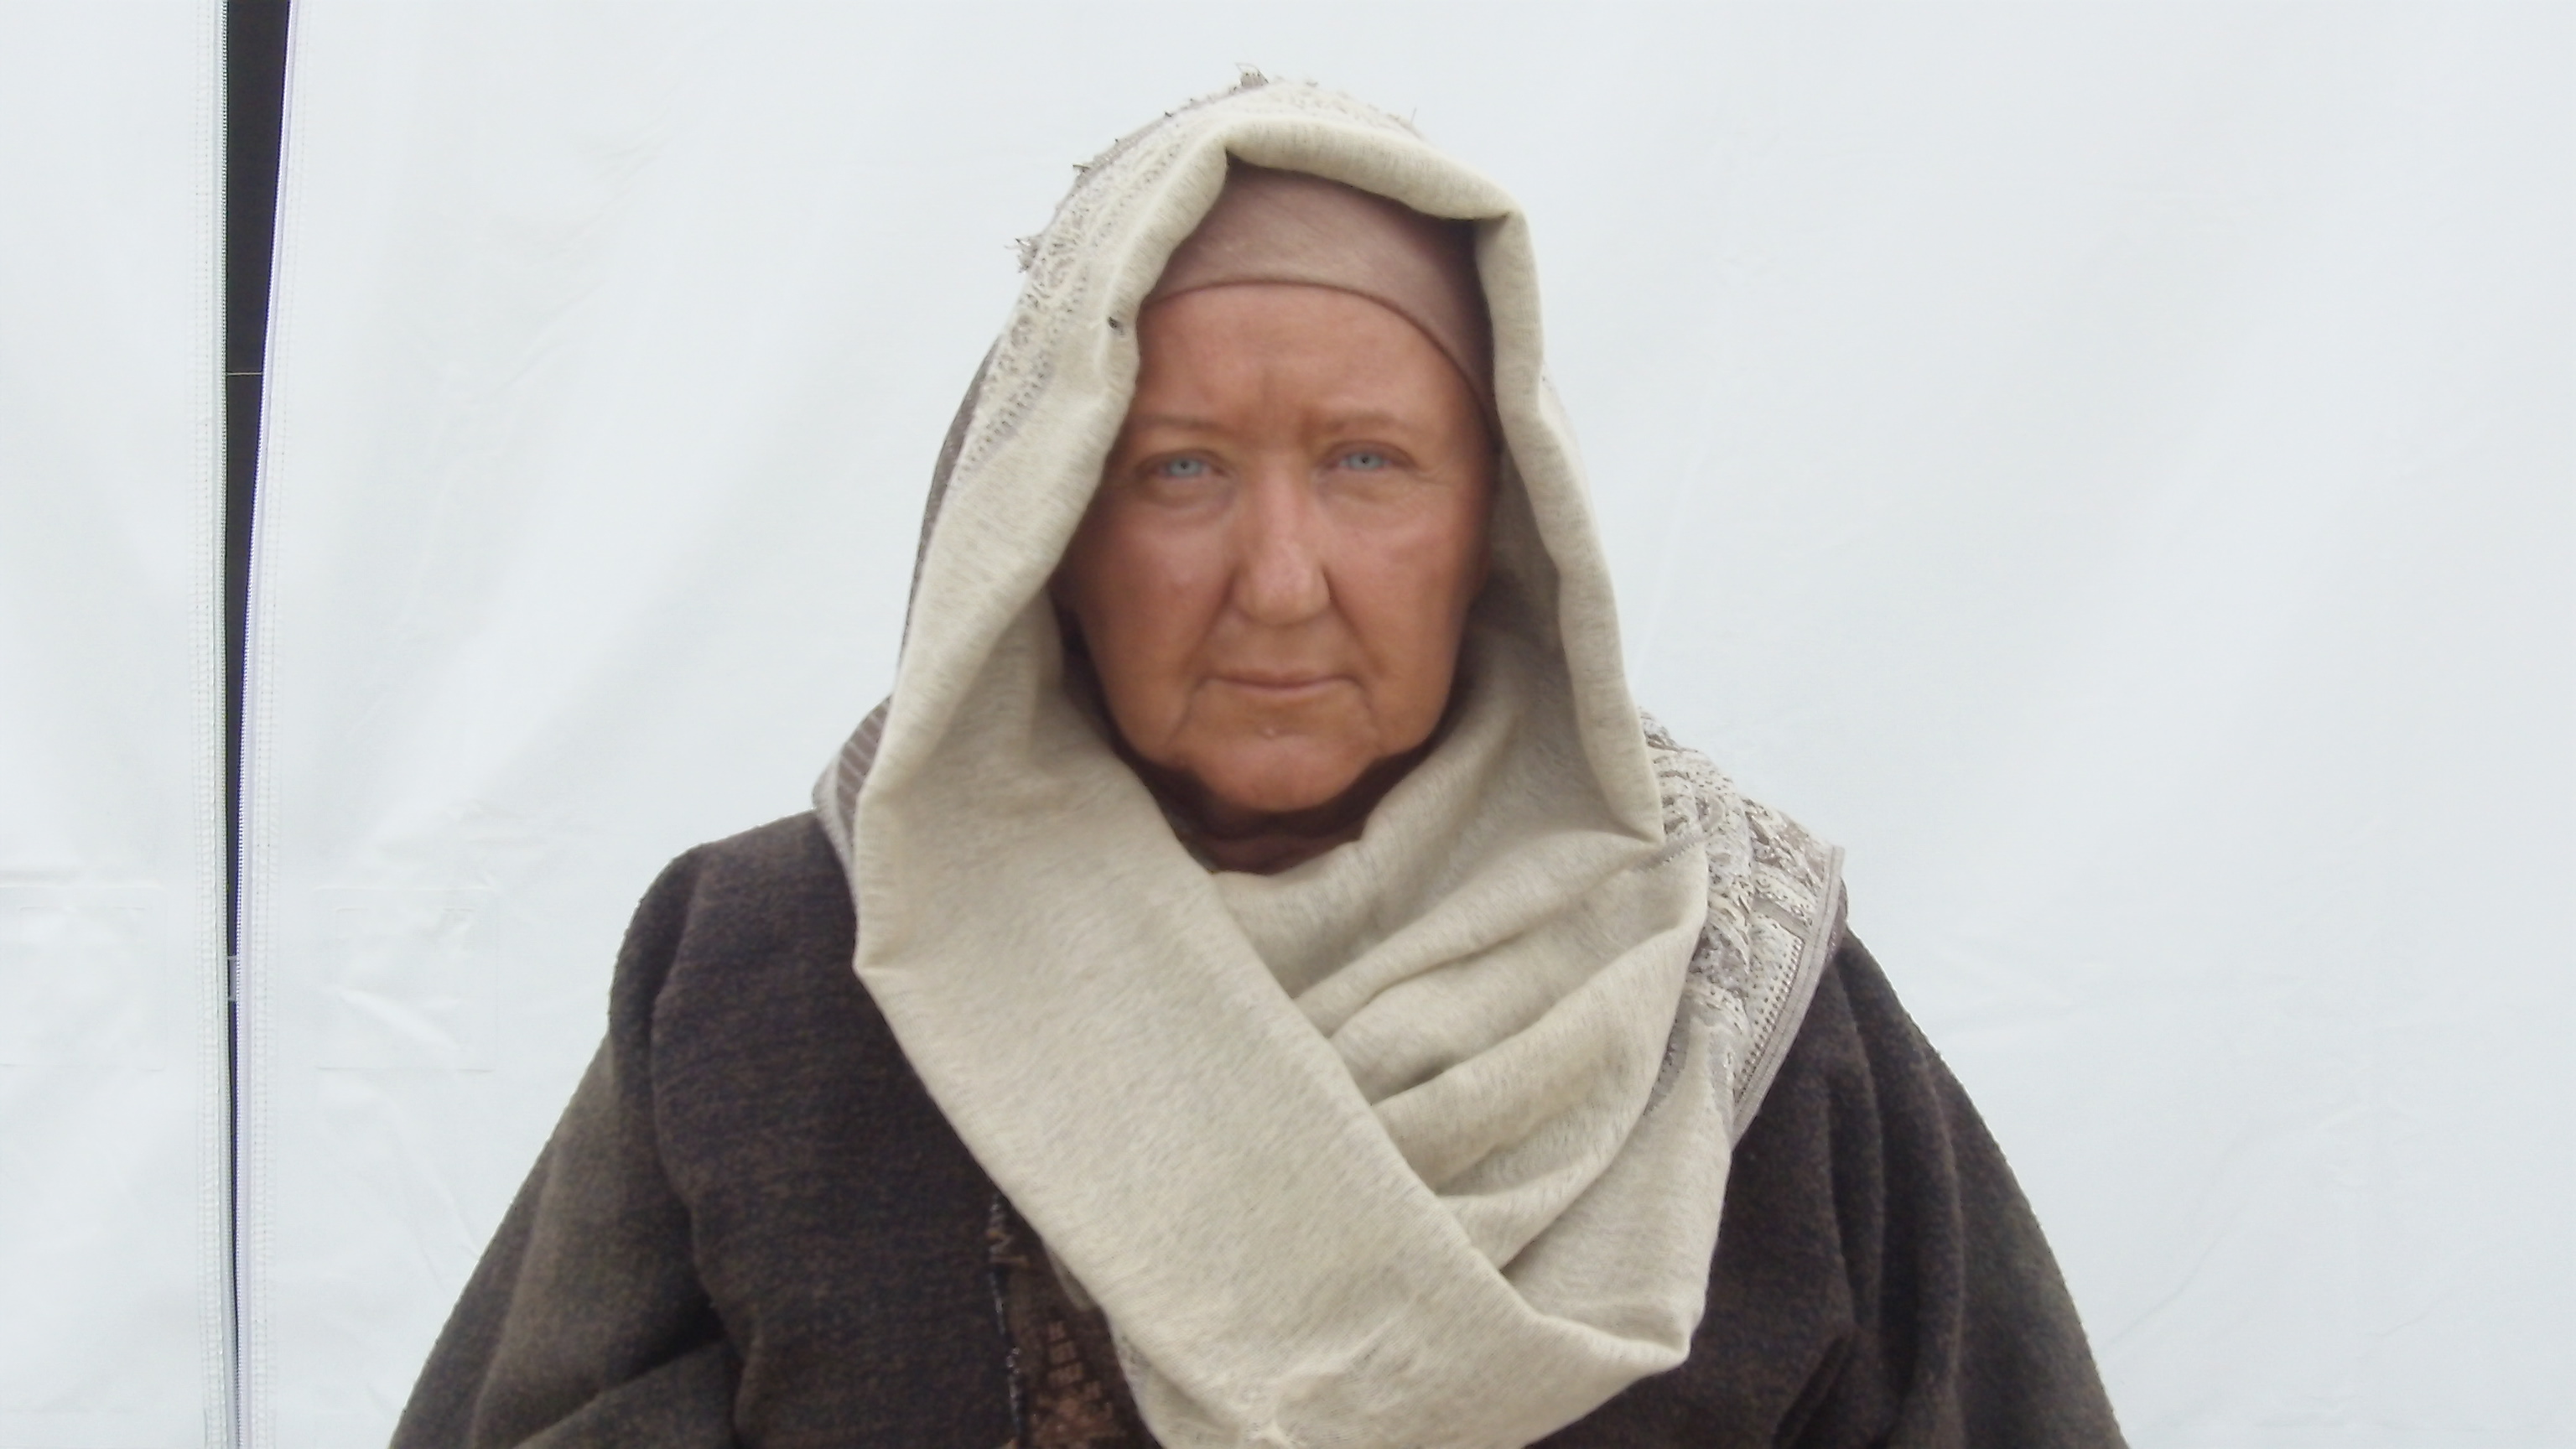 As the 82 year old Anna the Prophetess. LDS New Testiment film project.